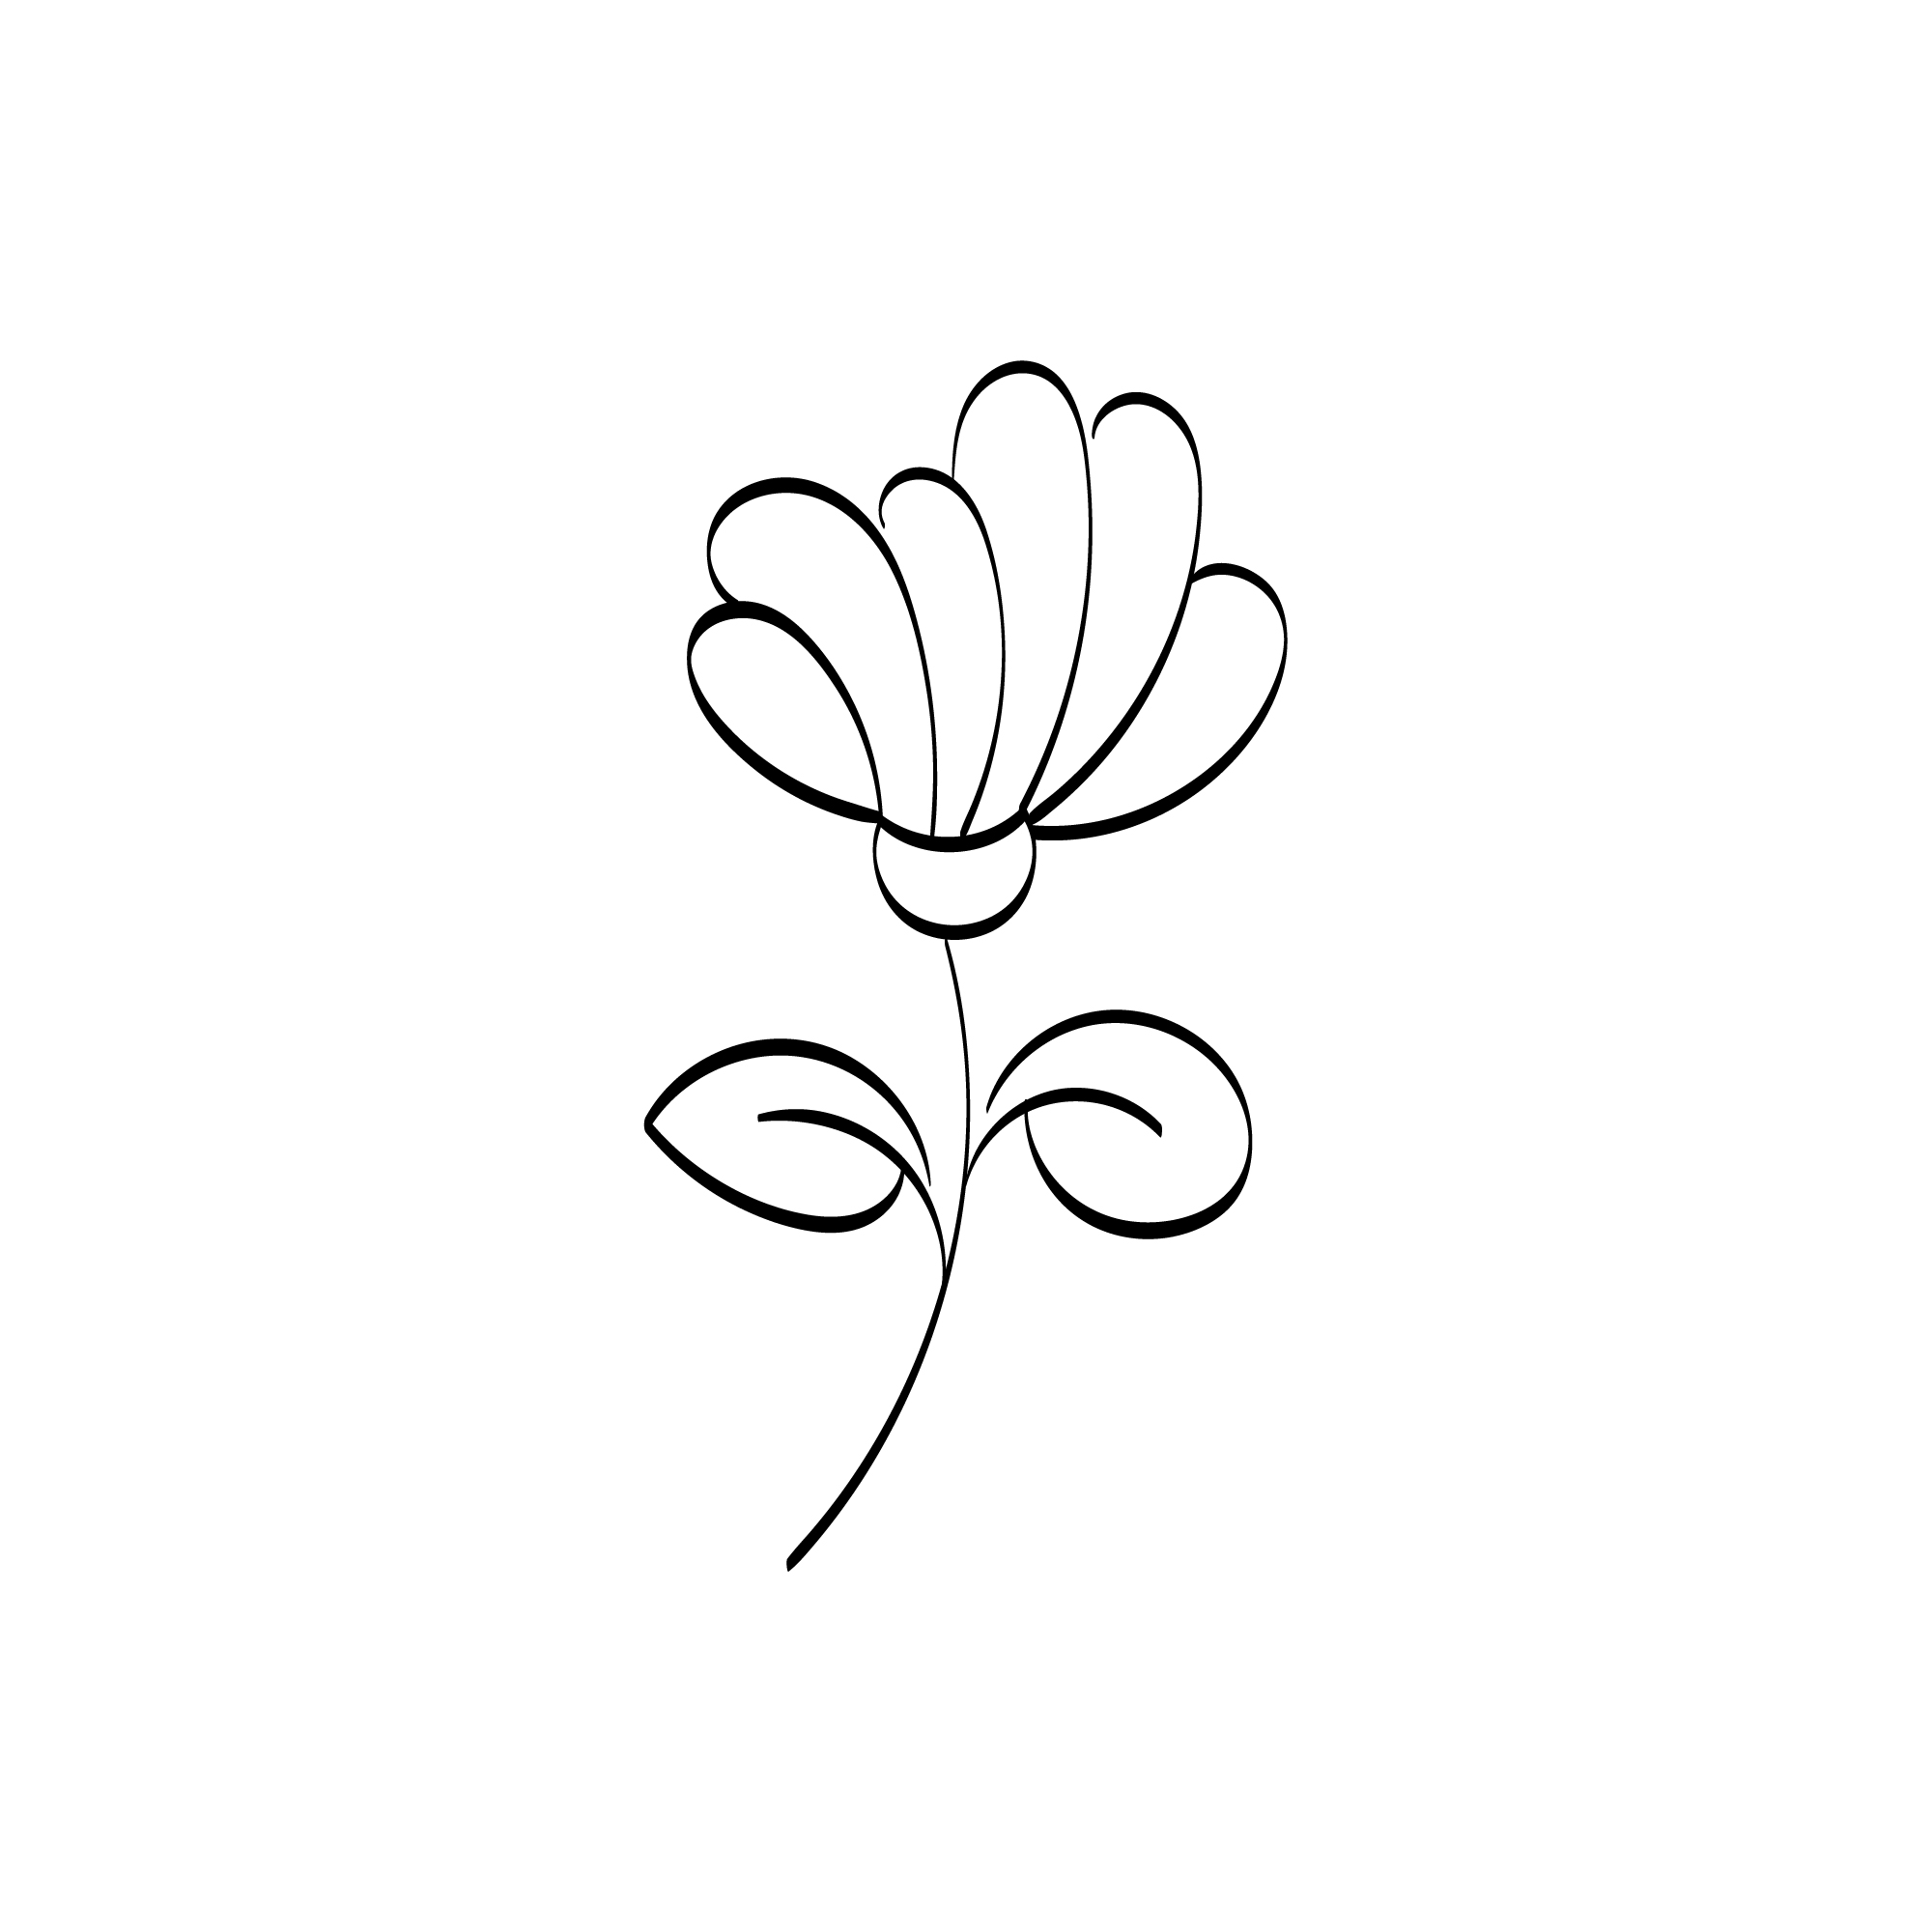 Floral Minimal Art Drawing with Line-art Preview image.